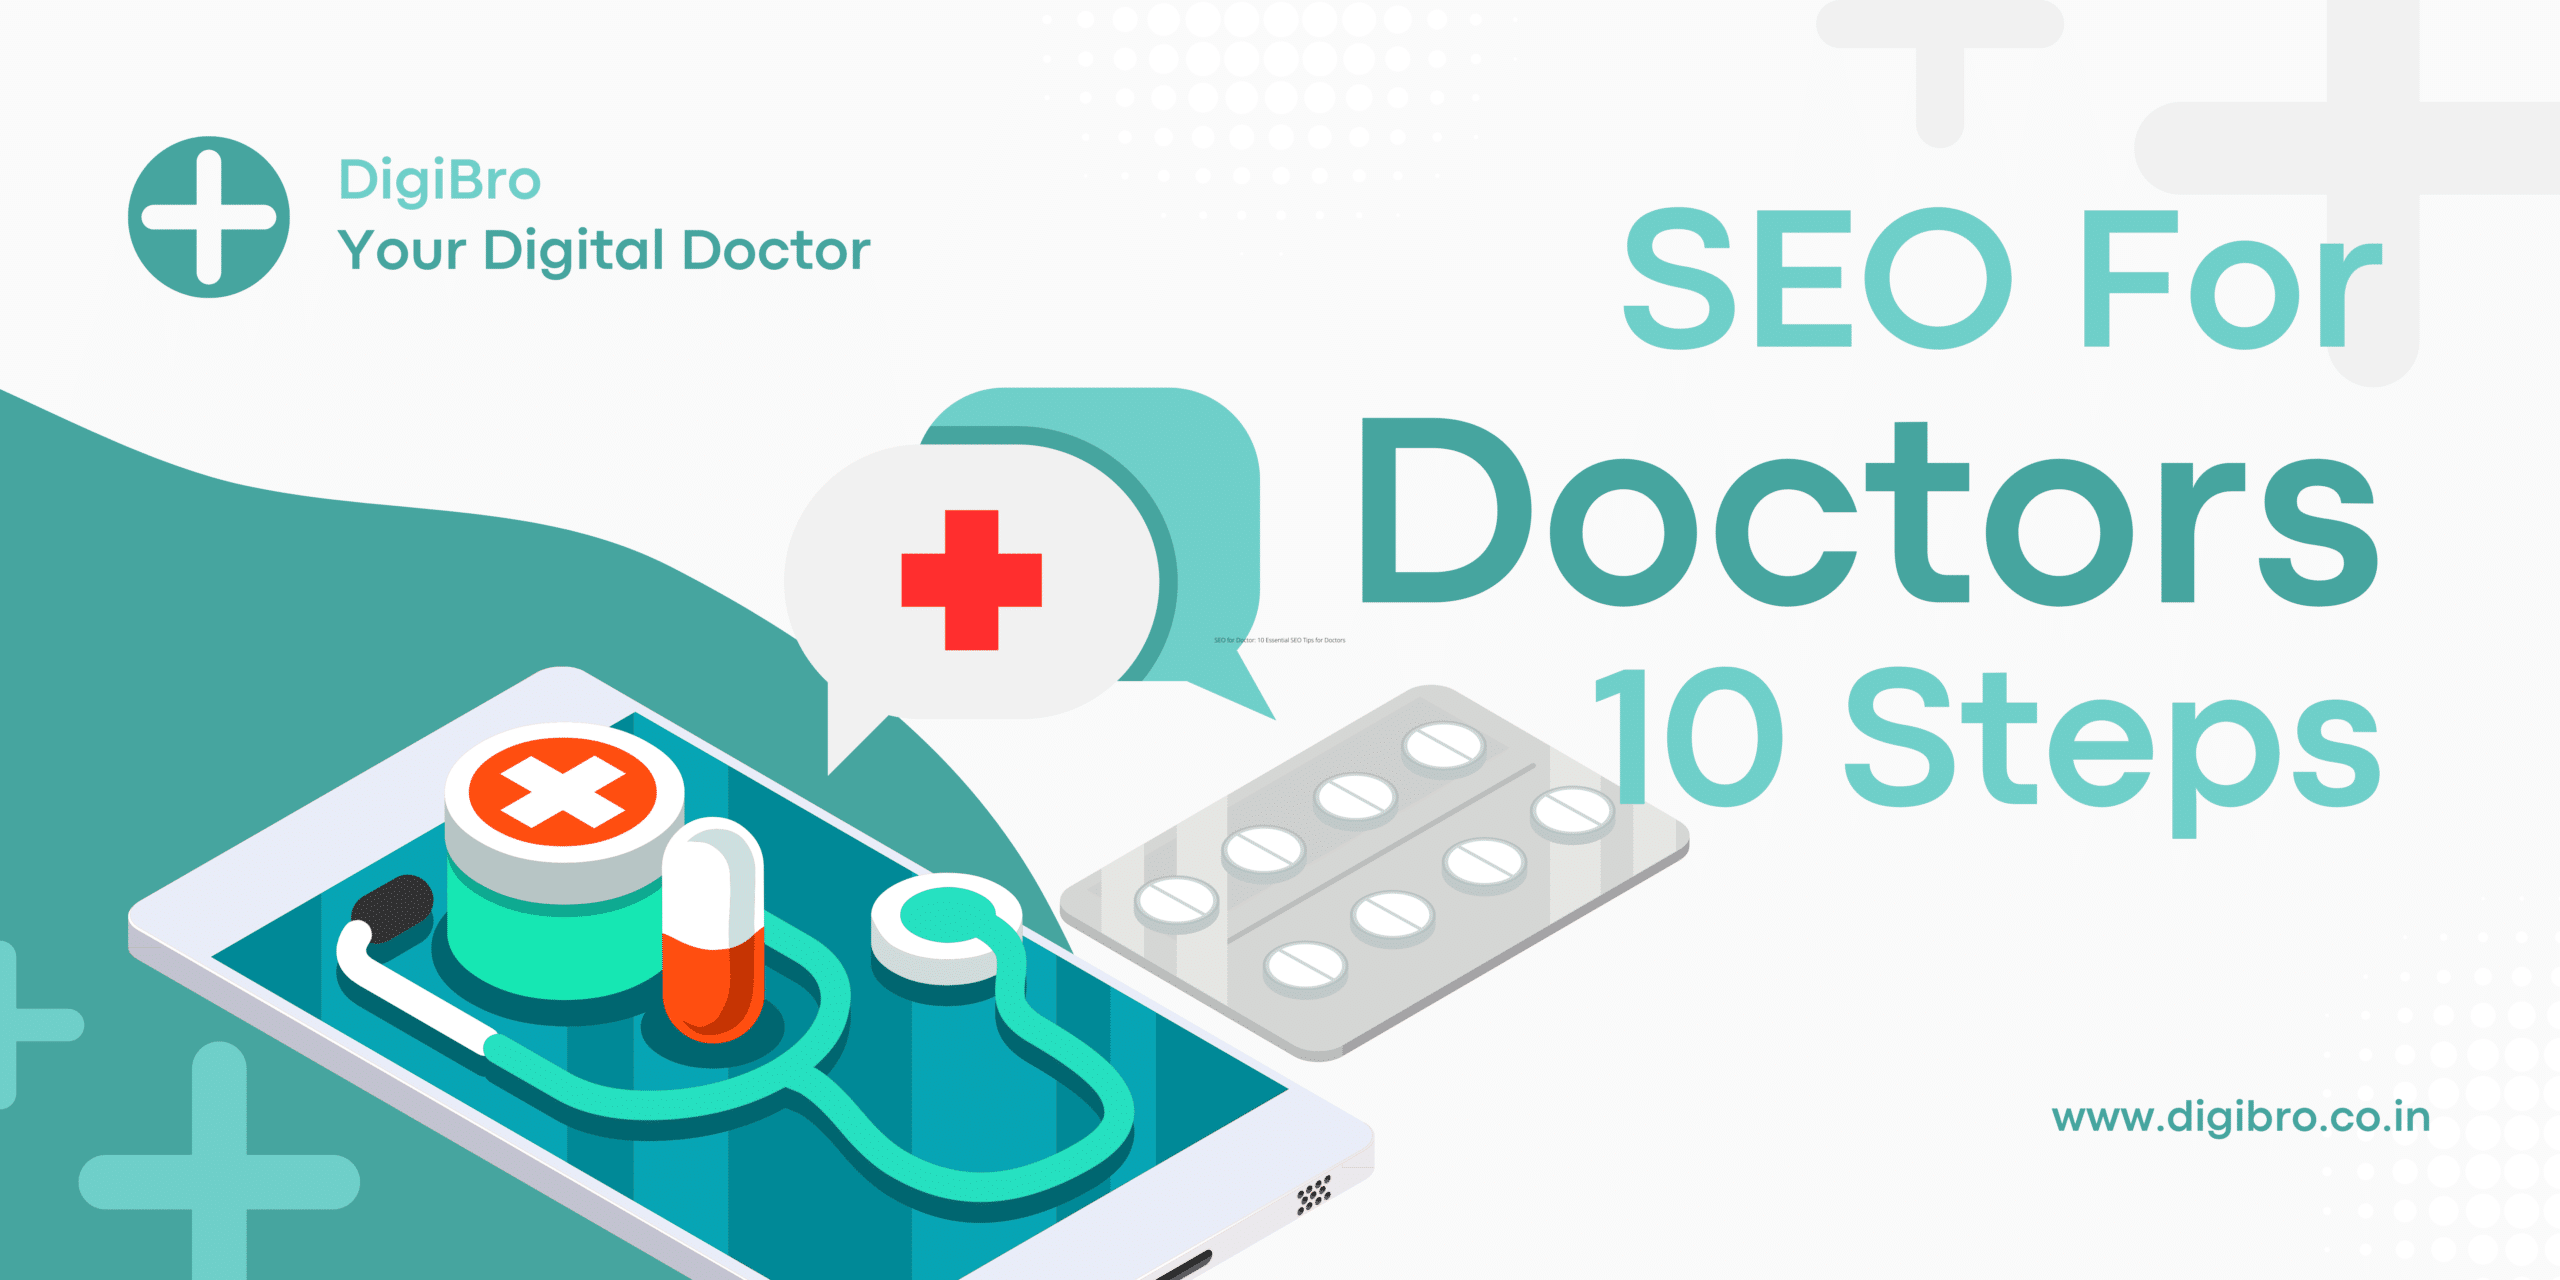 SEO for Doctors - 10 Essential SEO Tips for Medical Professionals by DigiBro.co.in